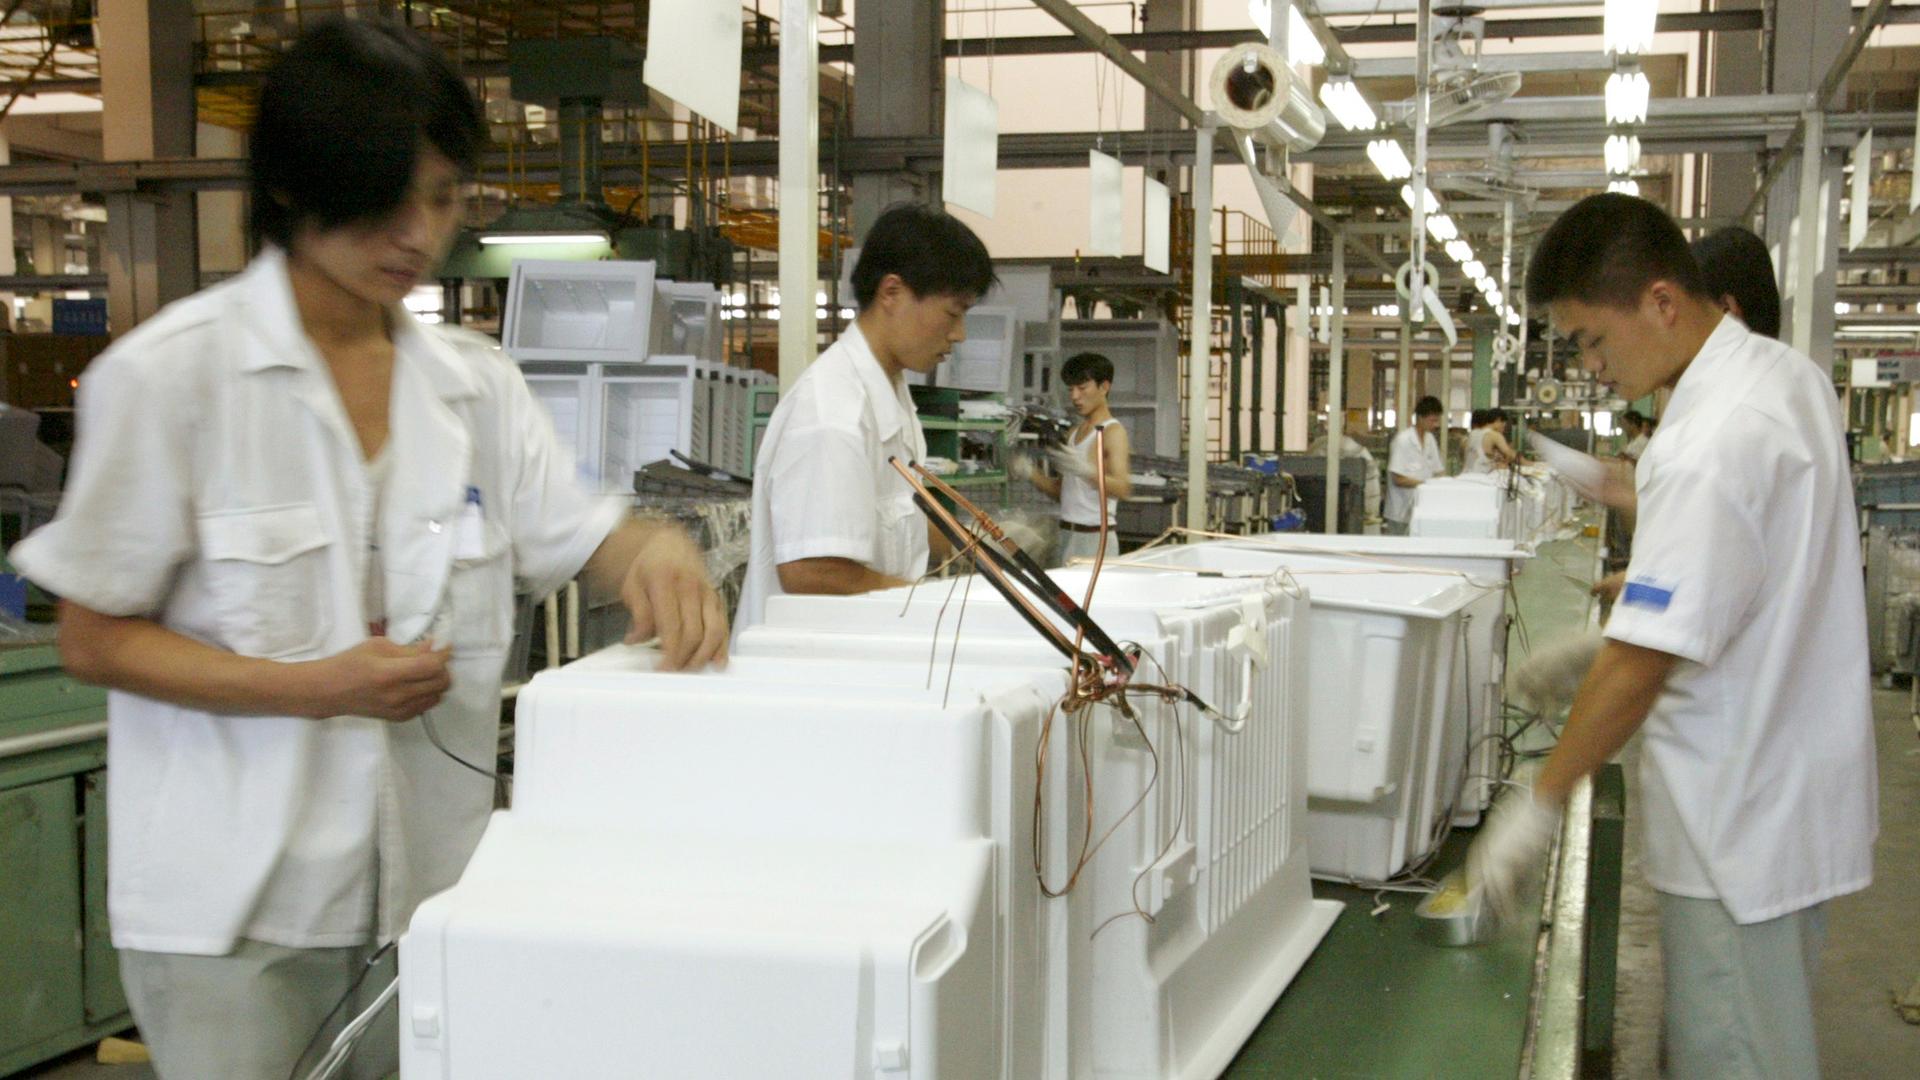 Chinese workers assemble a refrigerator in the eastern port city of Qinddao. A new study shows that for 15 products, Chinese manufacturing produces an average of 4.4 times the carbon emissions than if the products were made in the European Union.